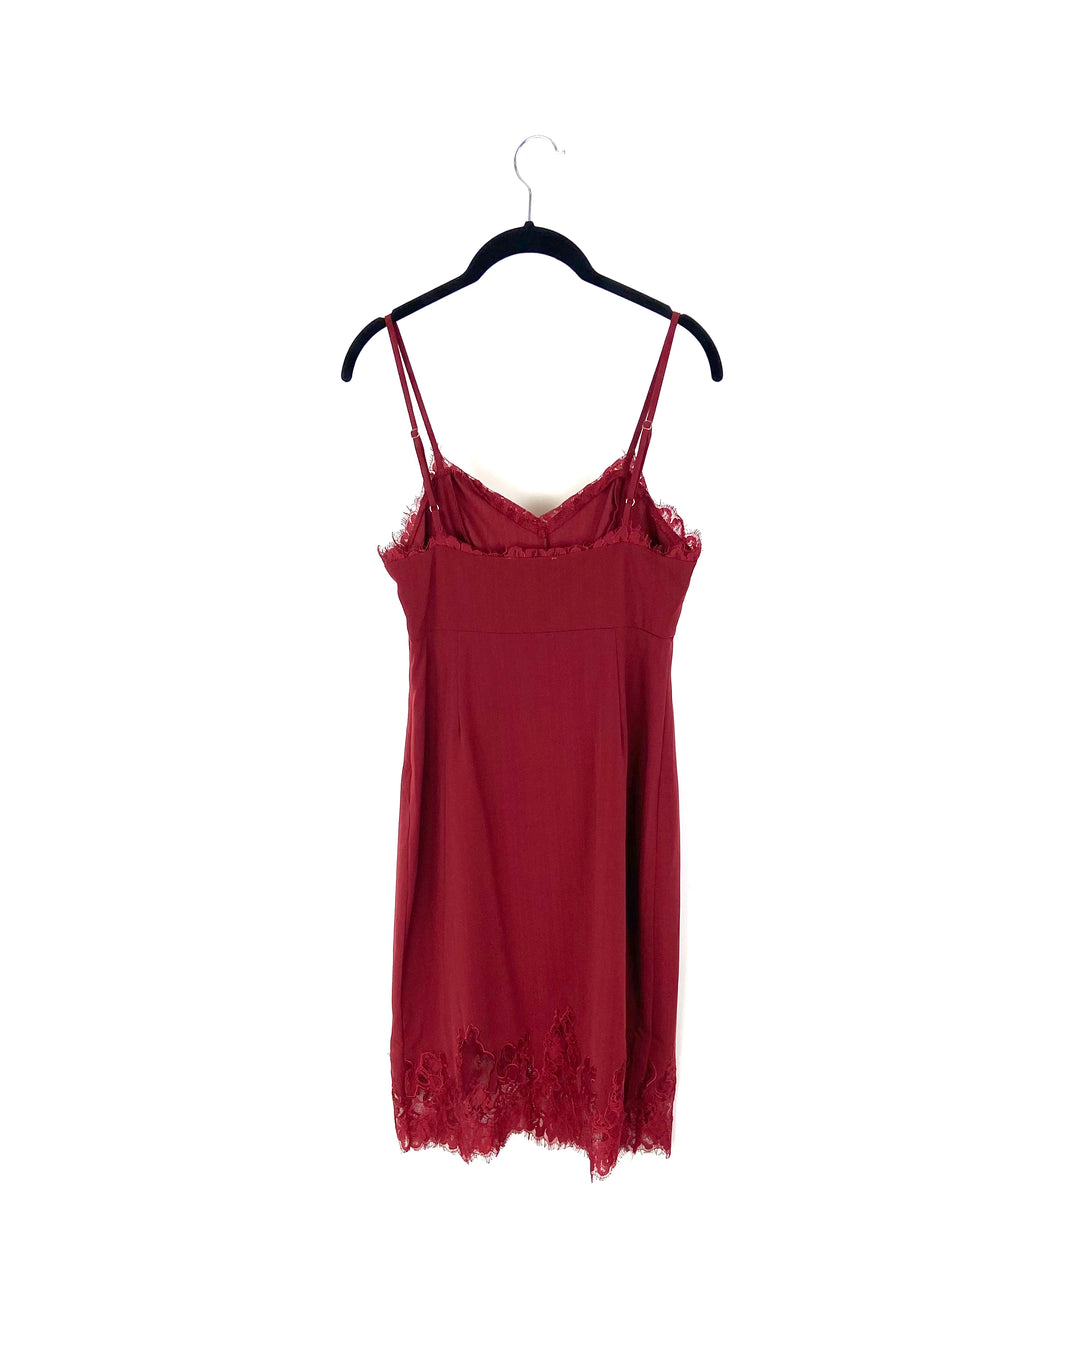 Red Lace Slip Dress - Small